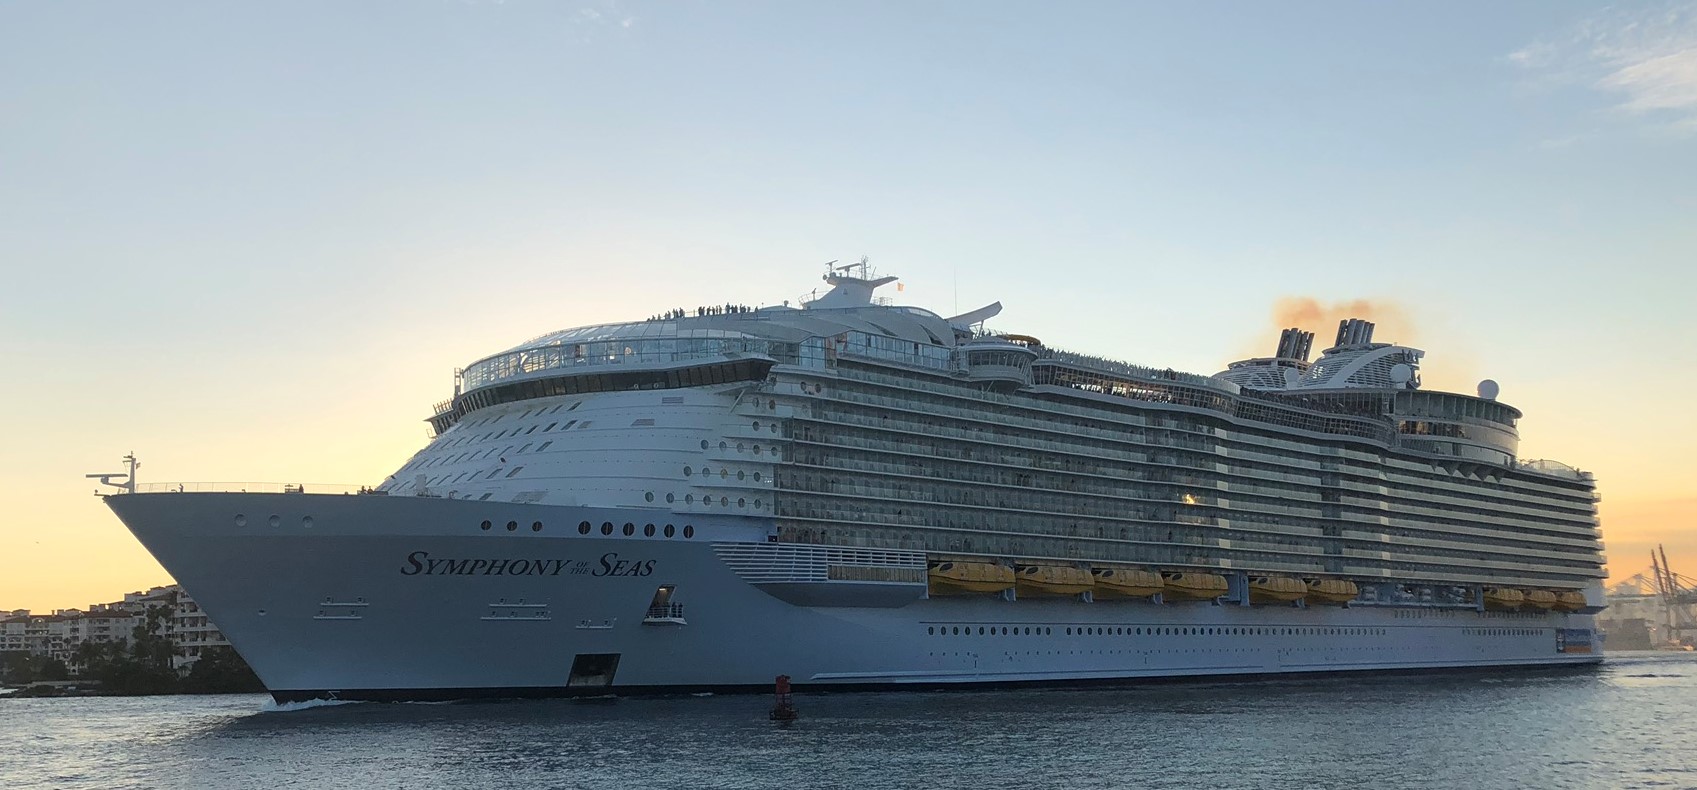 Symphony of the Seas by Wikipedia